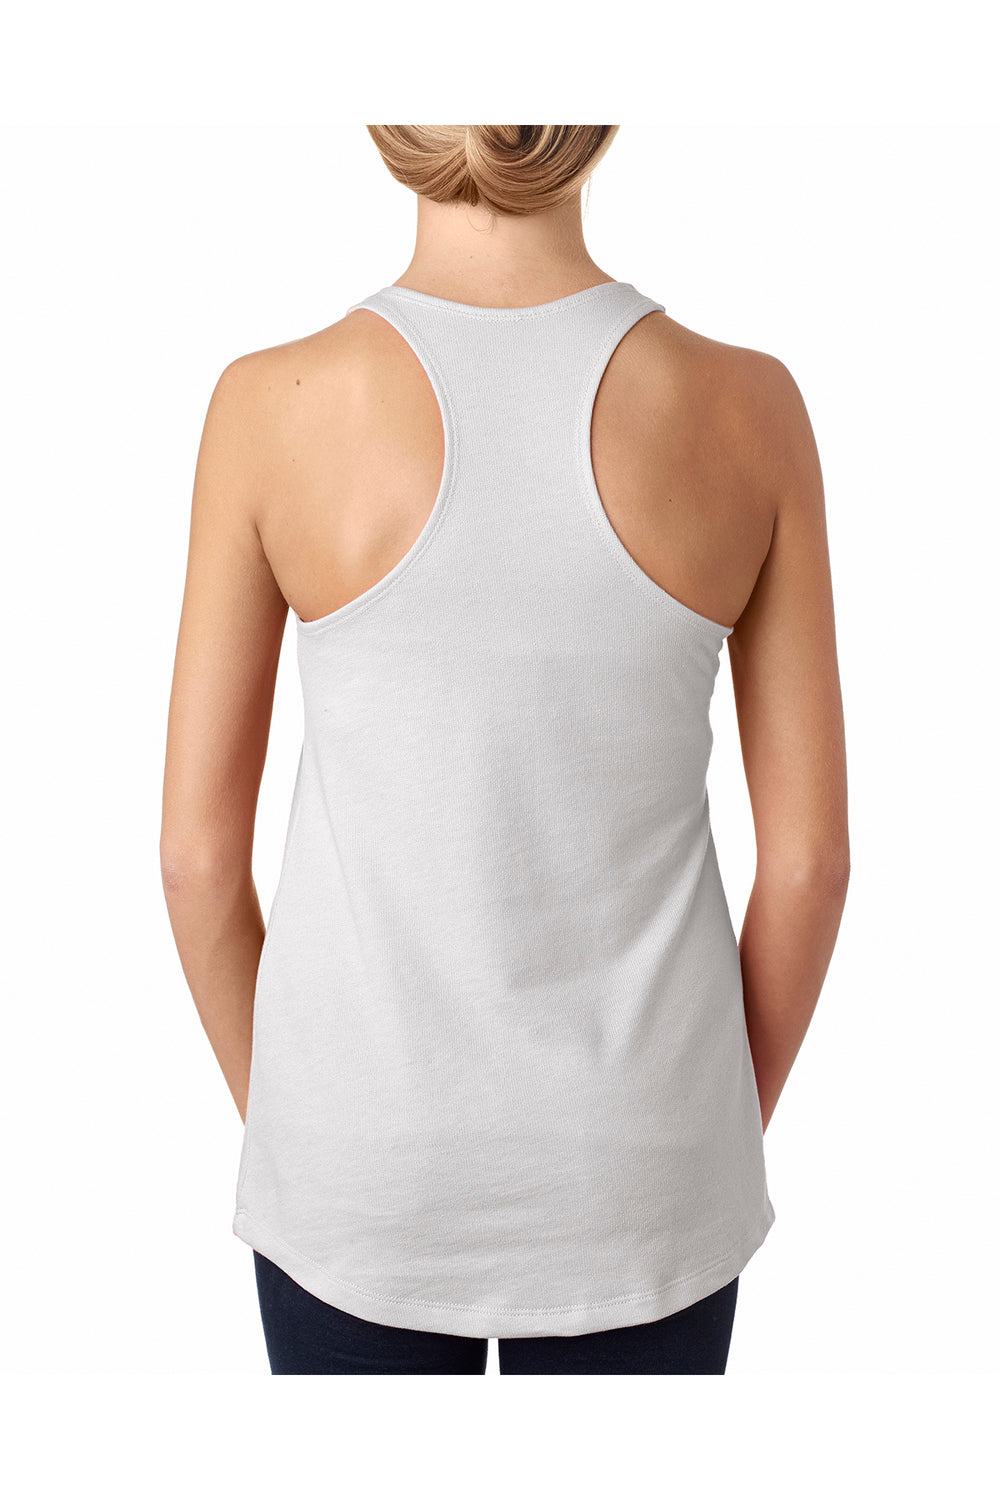 Next Level 6933 Womens French Terry Tank Top White Back